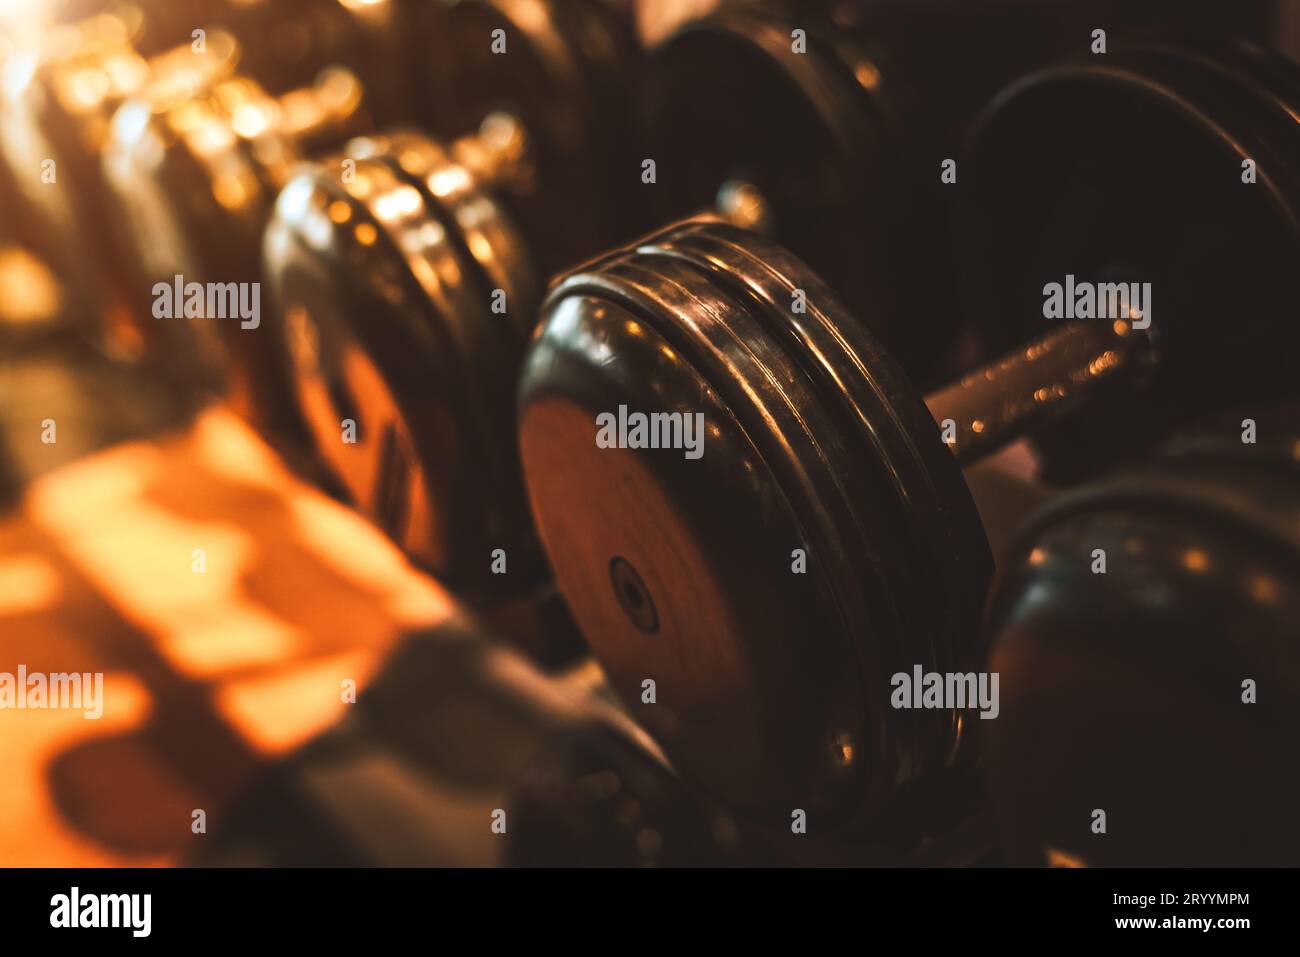 Black steel dumbbell set. Close up of dumbbells on rack in sport fitness center background. Workout training and fitness gym con Stock Photo